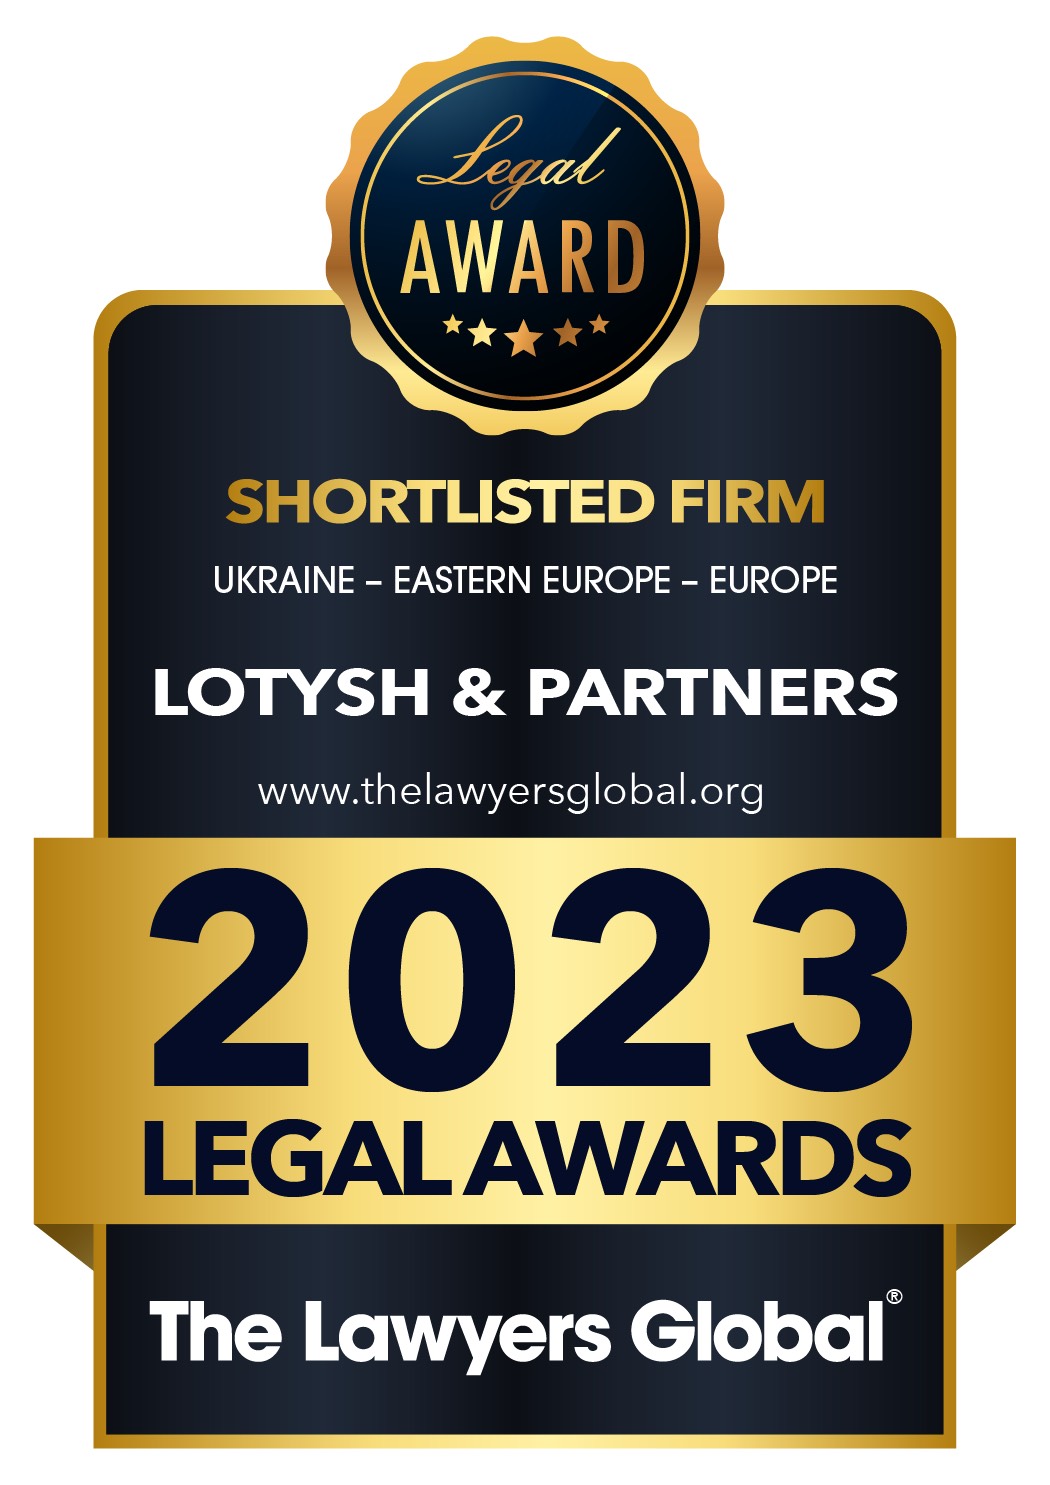 Award from the international publication “The Lawyers Global”